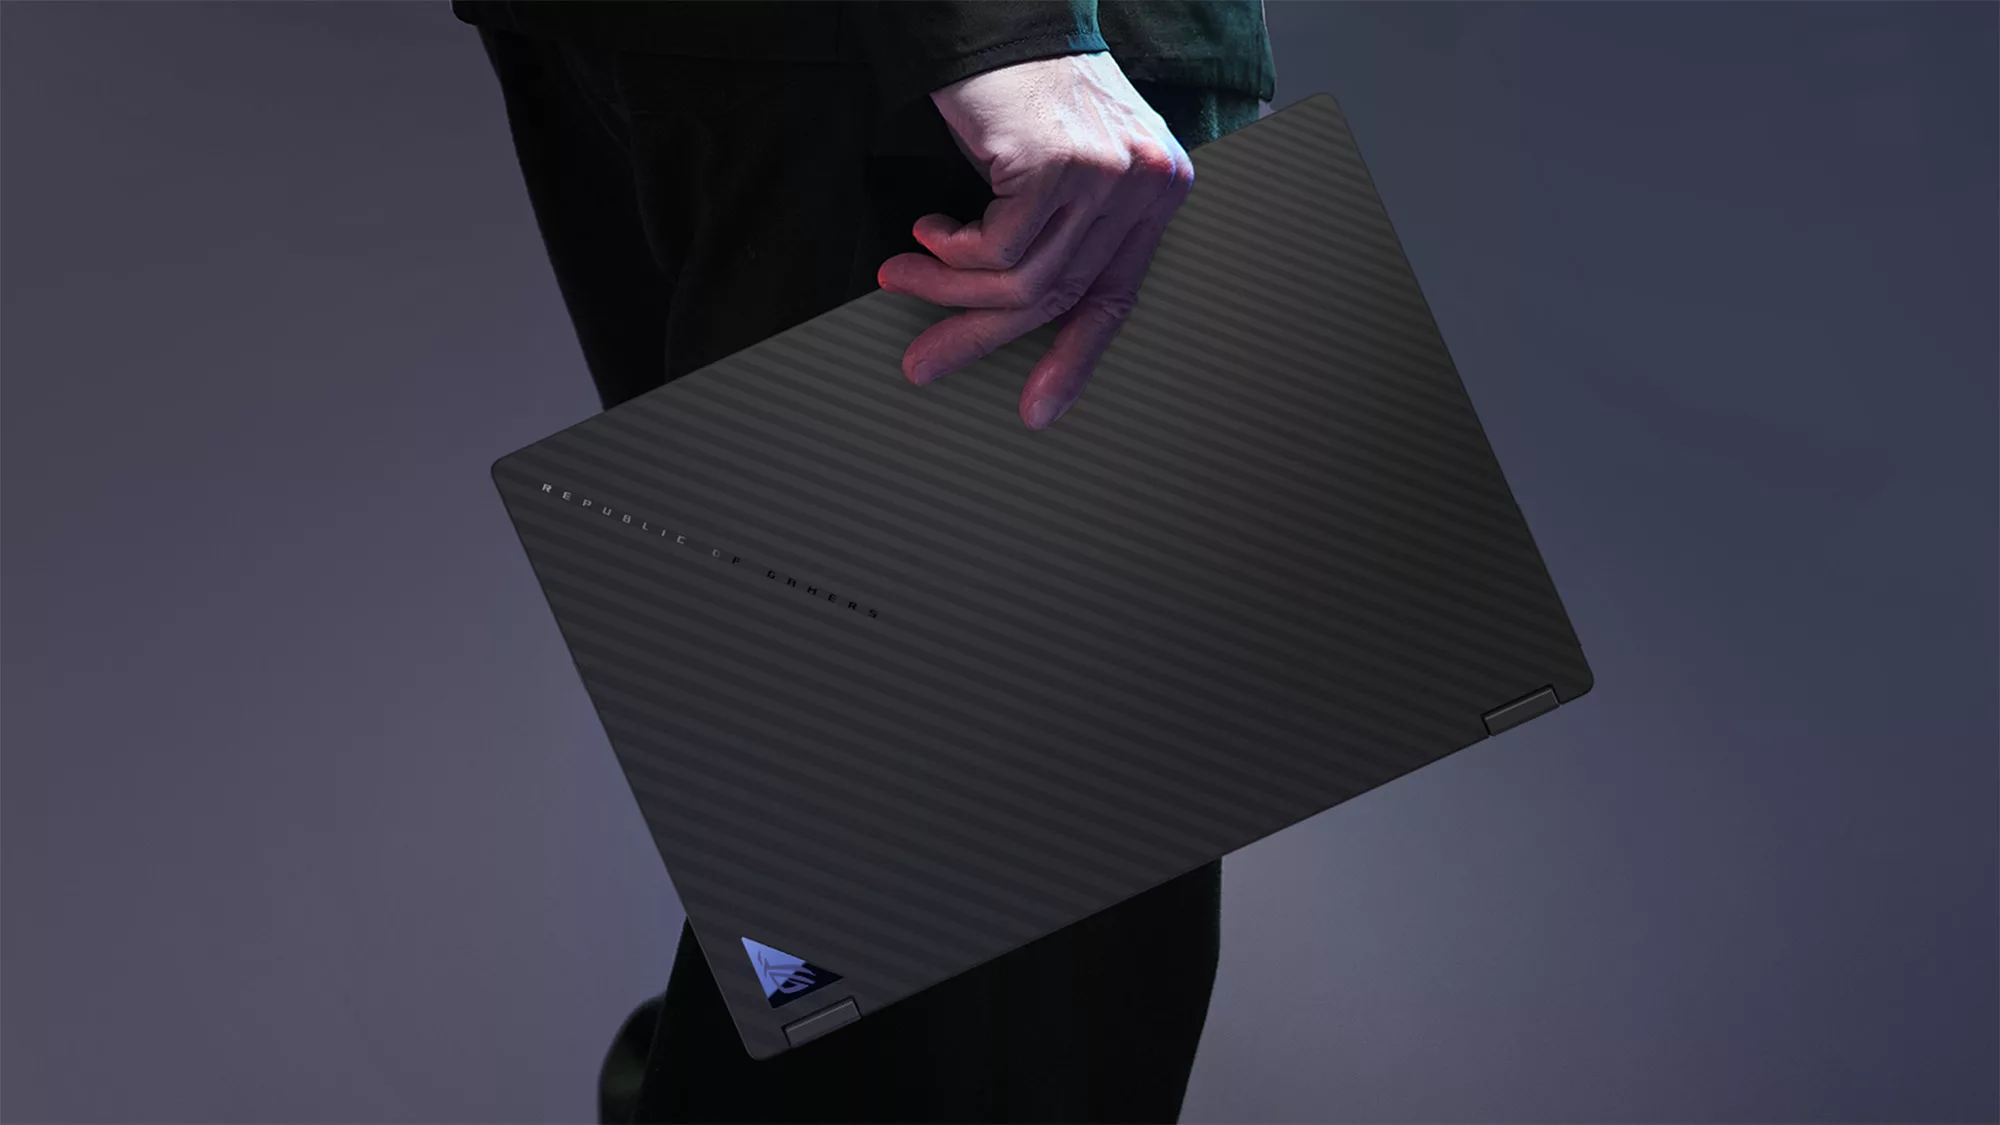 A man standing and holding a closed ROG Flow X13 laptop in his hand.